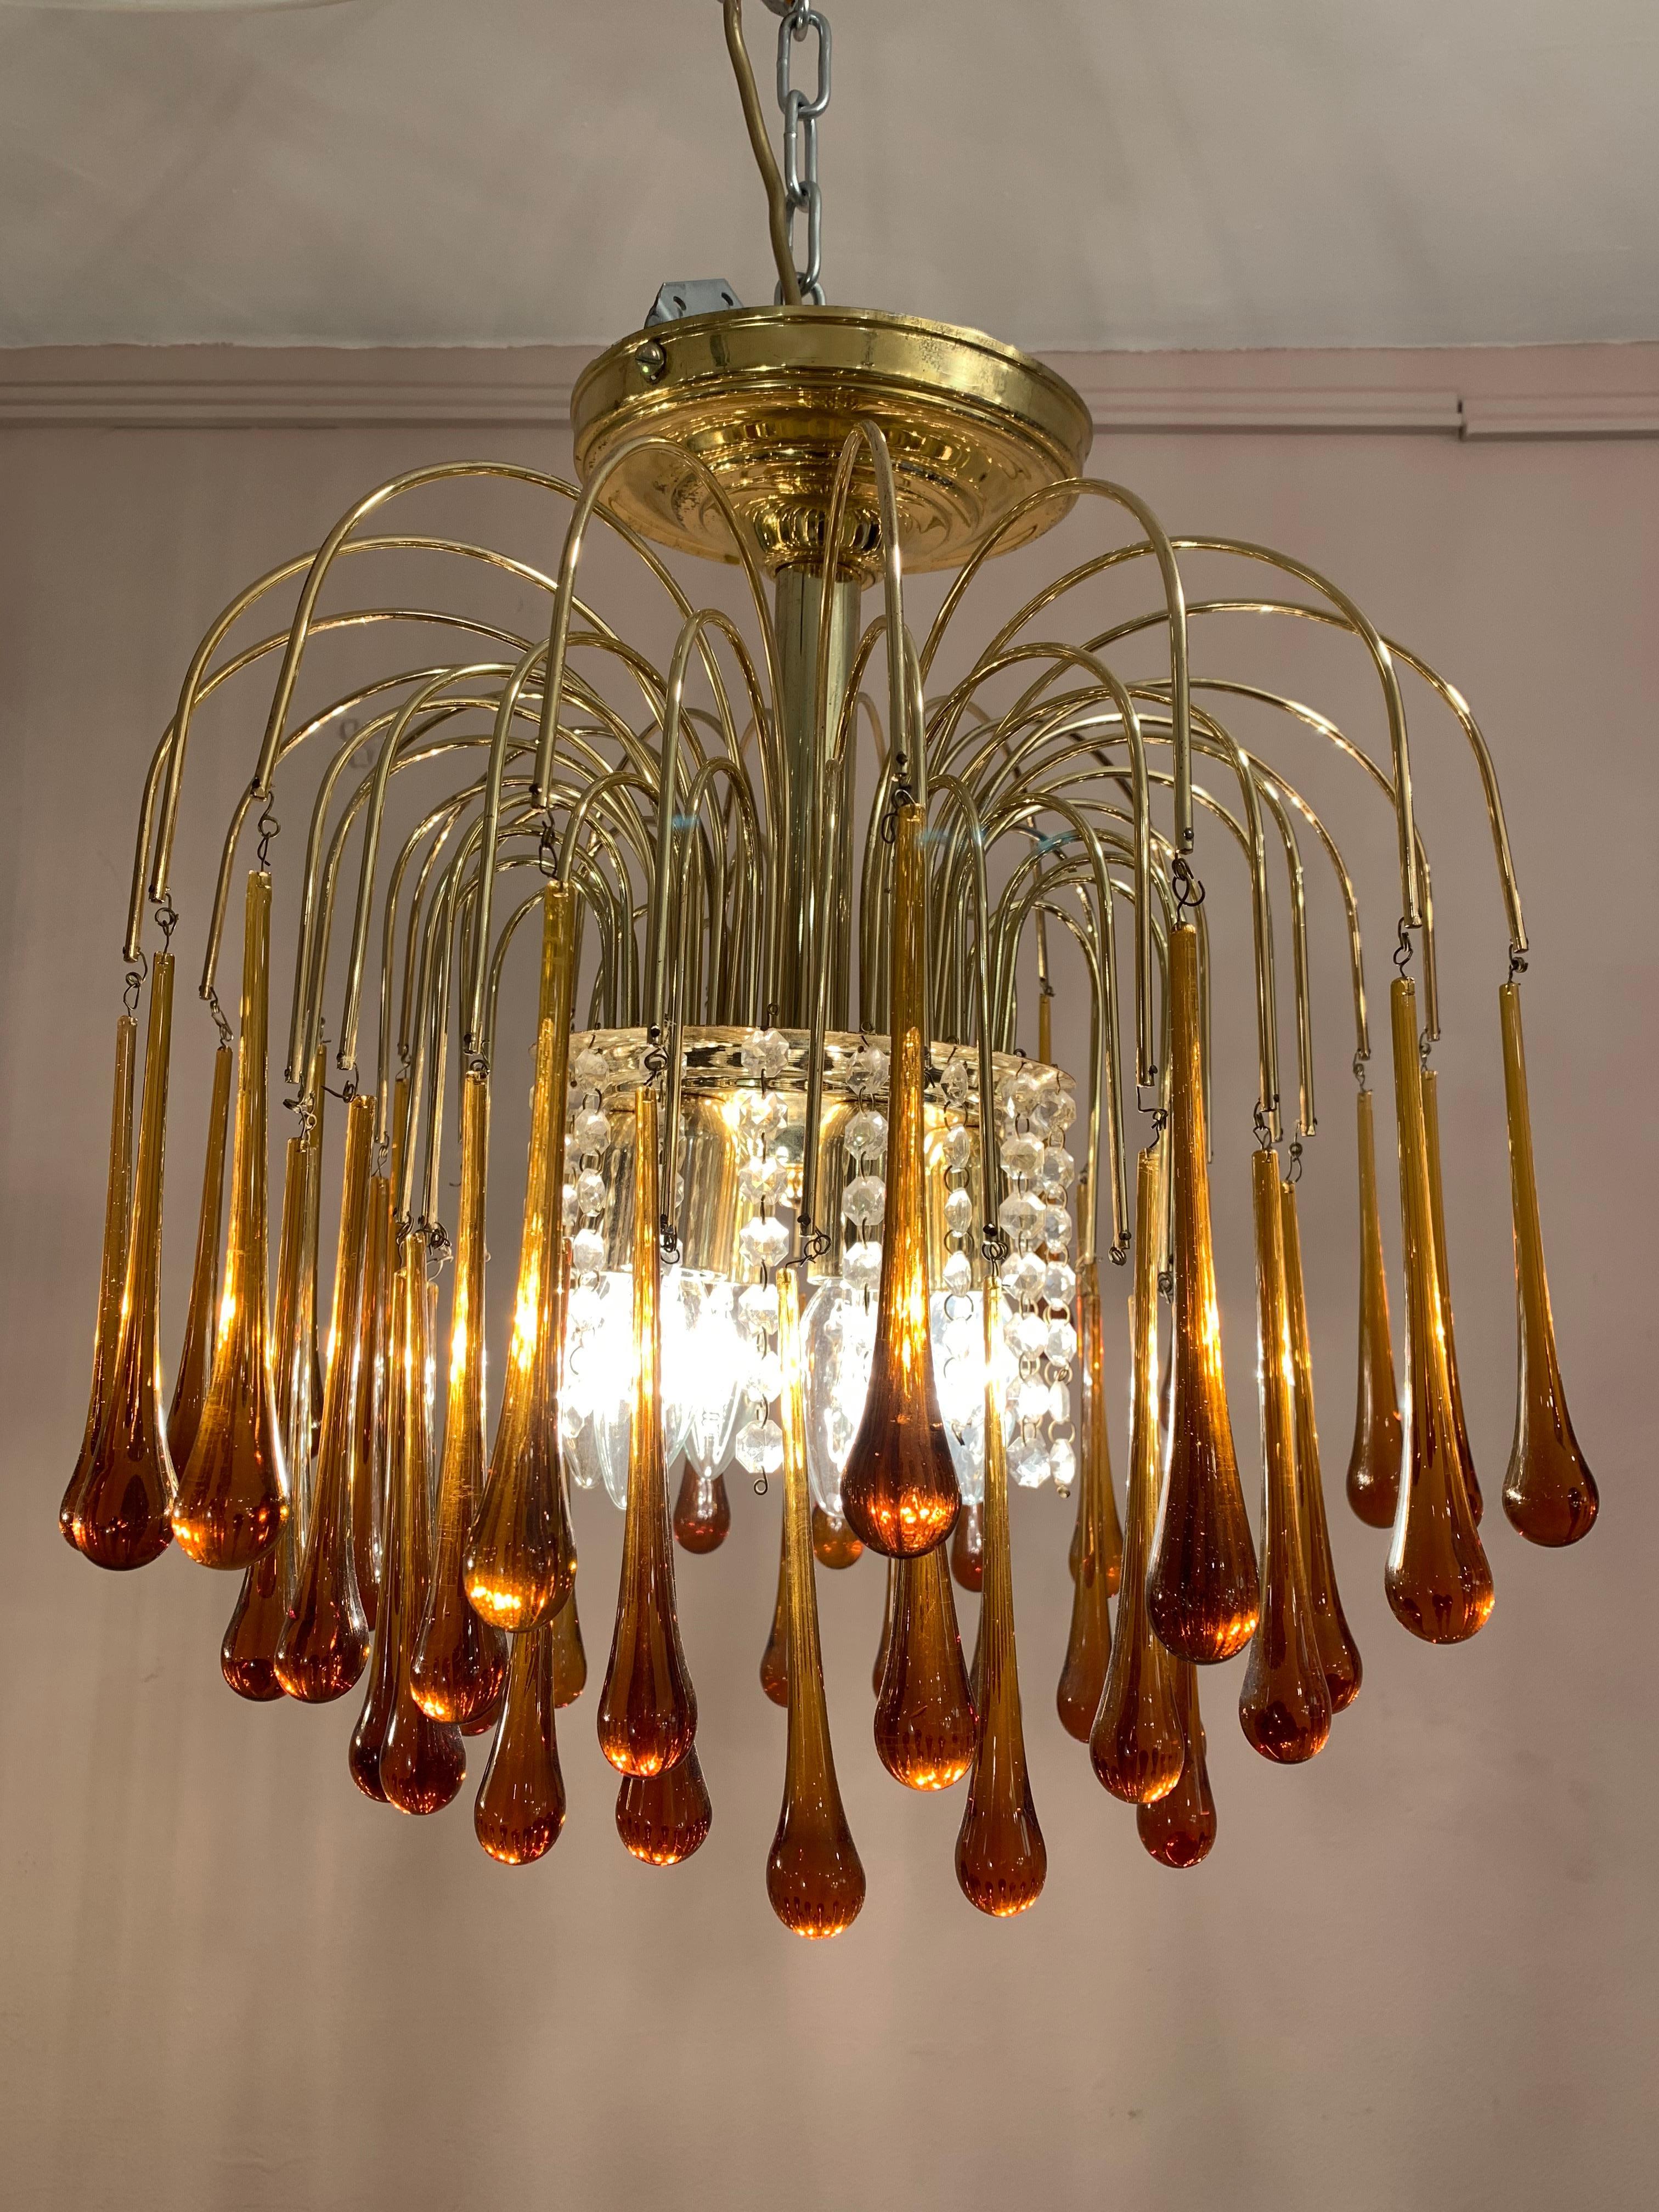 Vintage 1960s Italian Murano, amber-glass, cascading, flushmount chandelier designed by Paolo Venini. There are three-tiers of amber glass teardrops suspended from brass waterfall stems.

Six E14 screw-in bulbs sit under the brass canopy at the